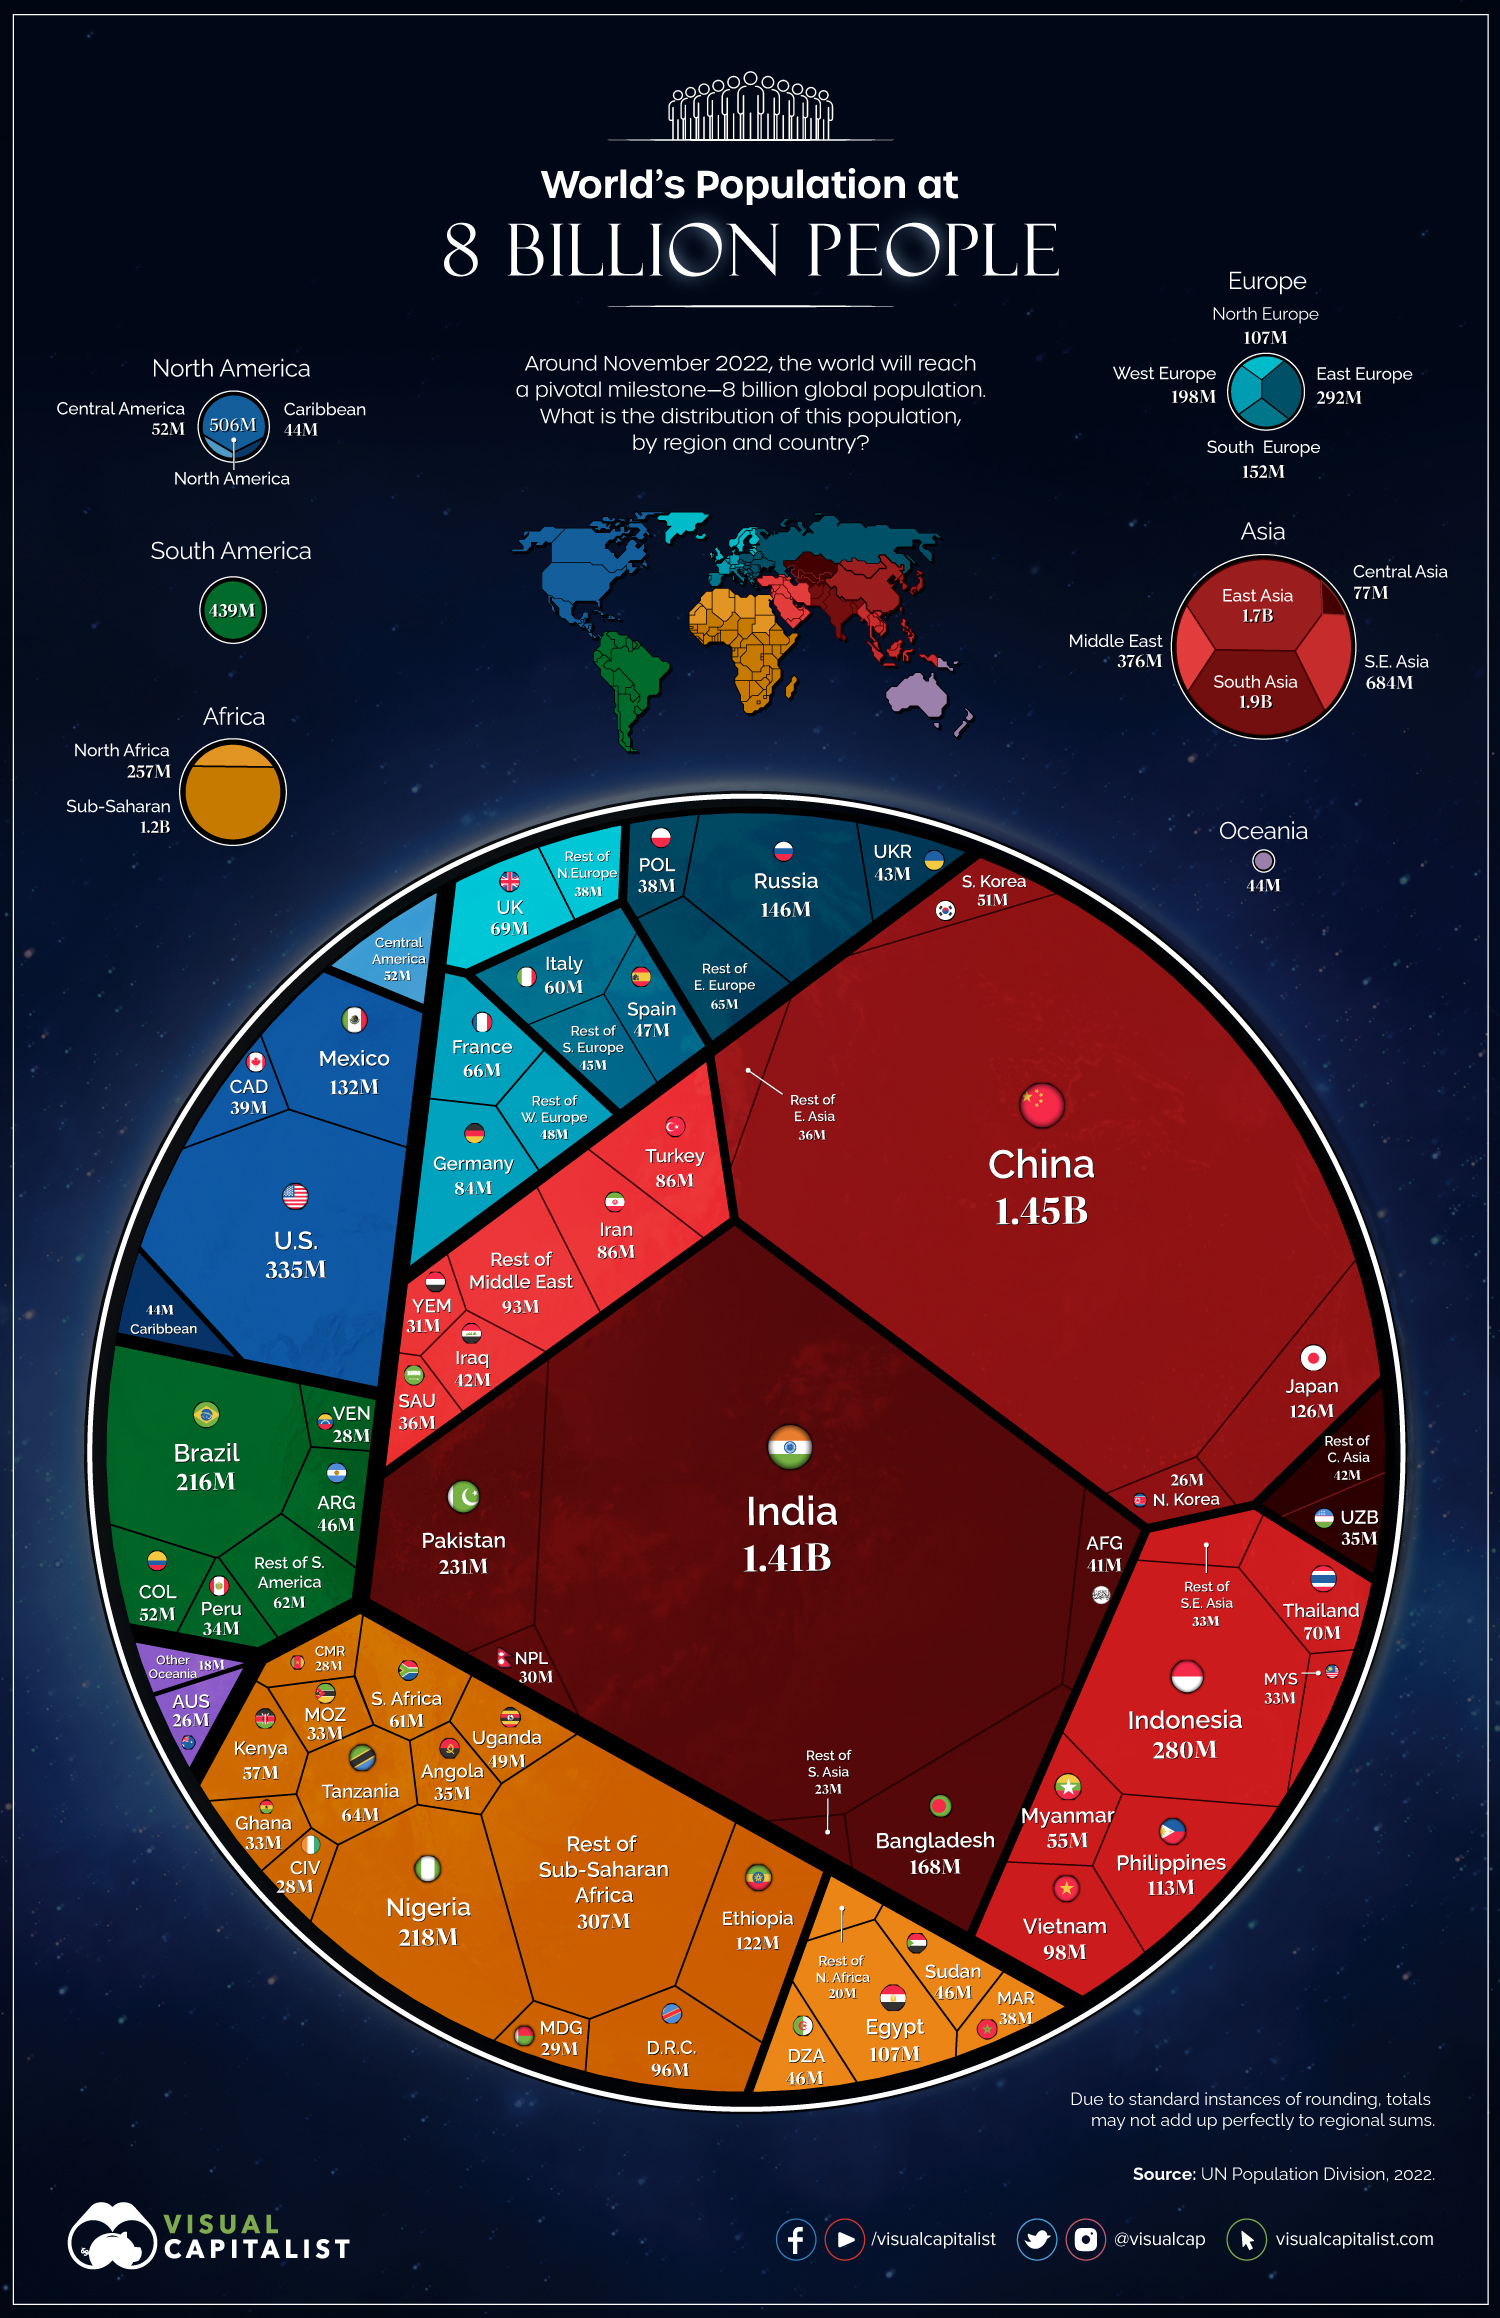 Visualized: The Population at 8 Billion, by Country